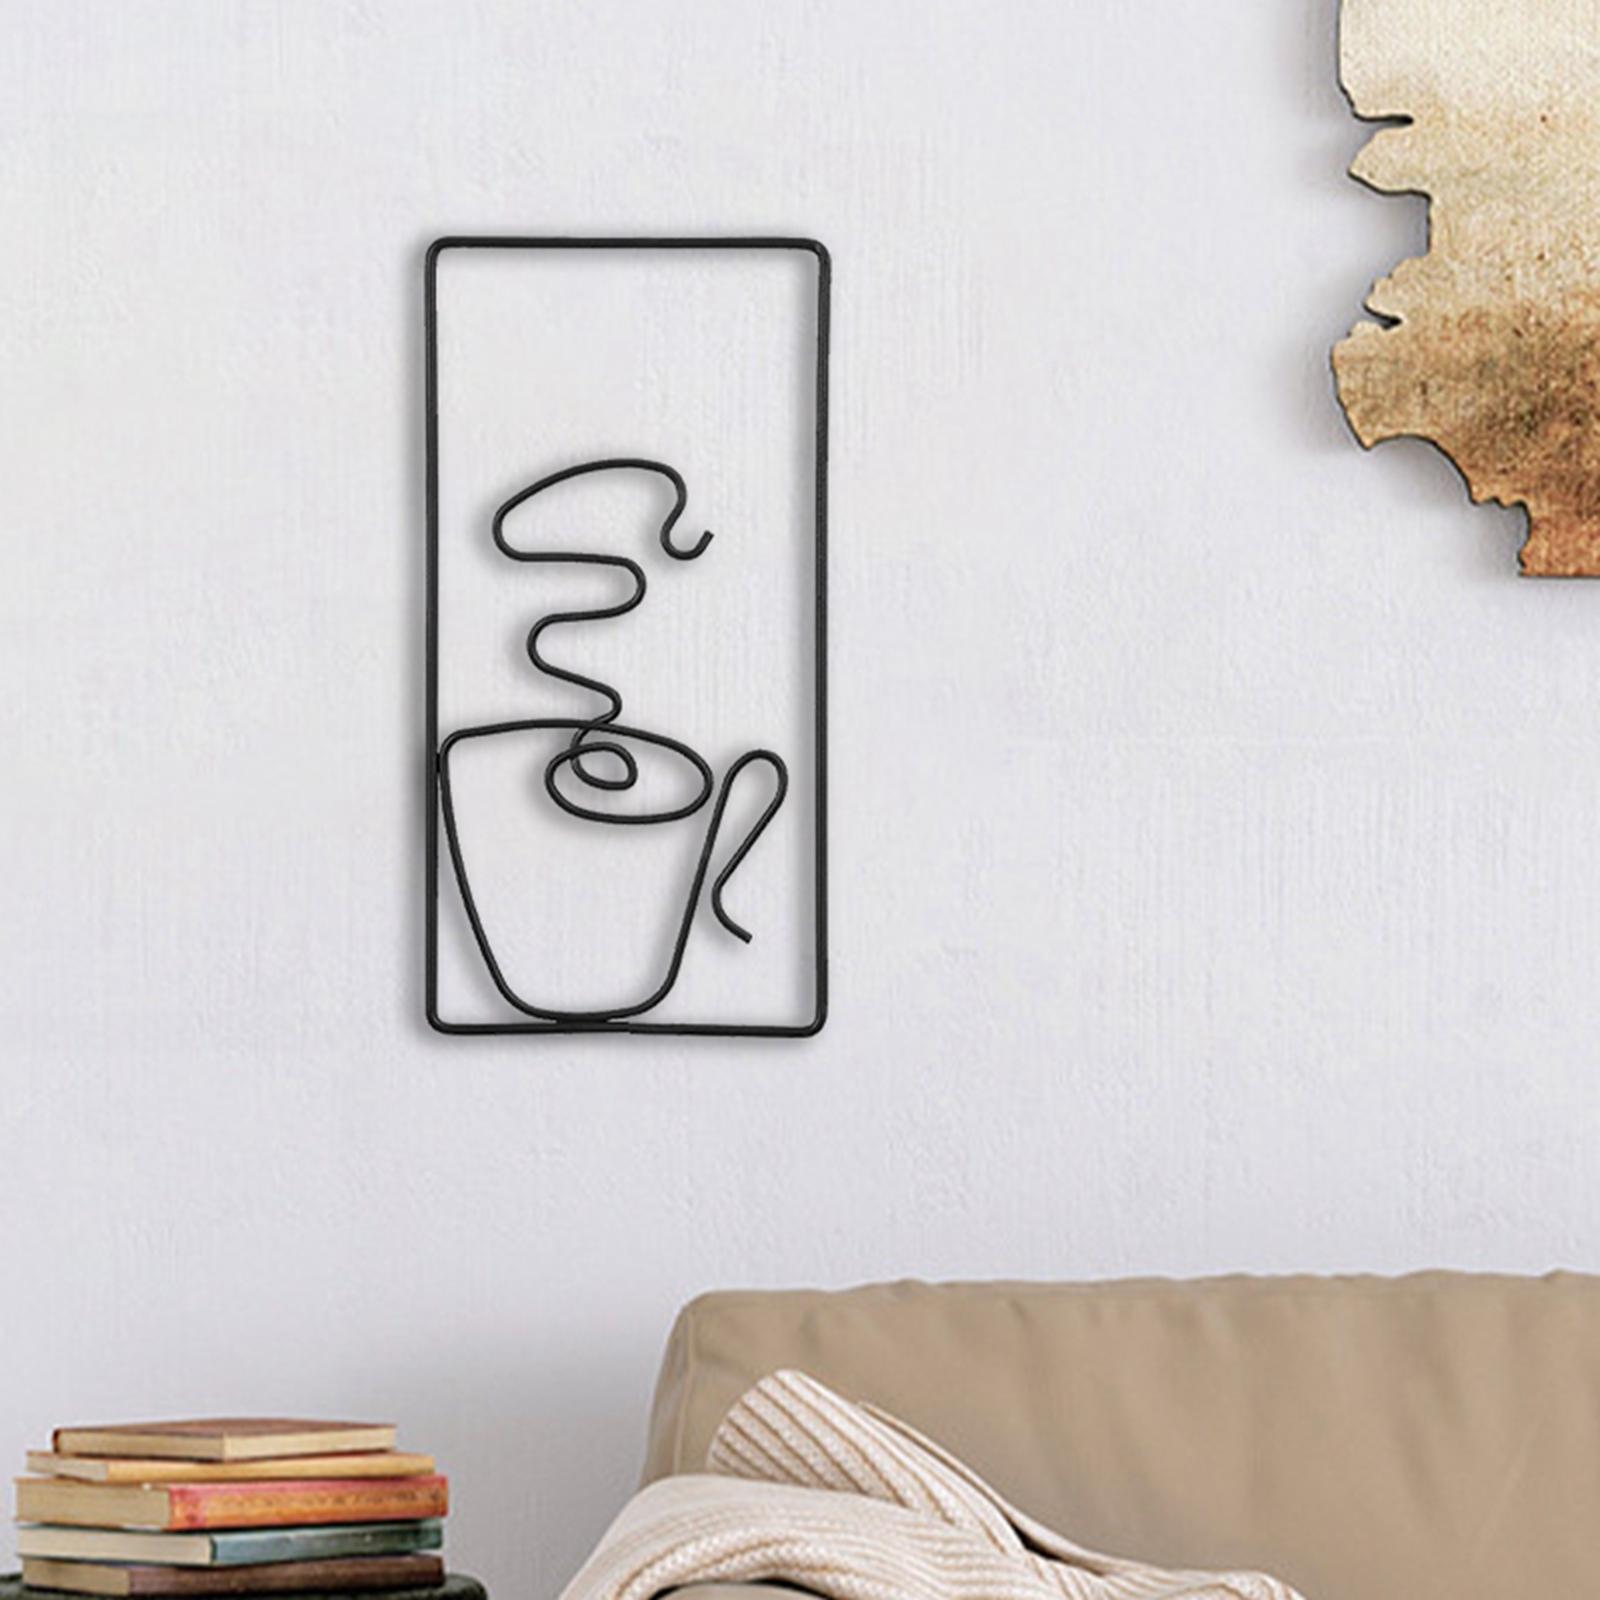 Modern Metal Wall Art Decors Line Wall Sculptures for Office Bedroom style I